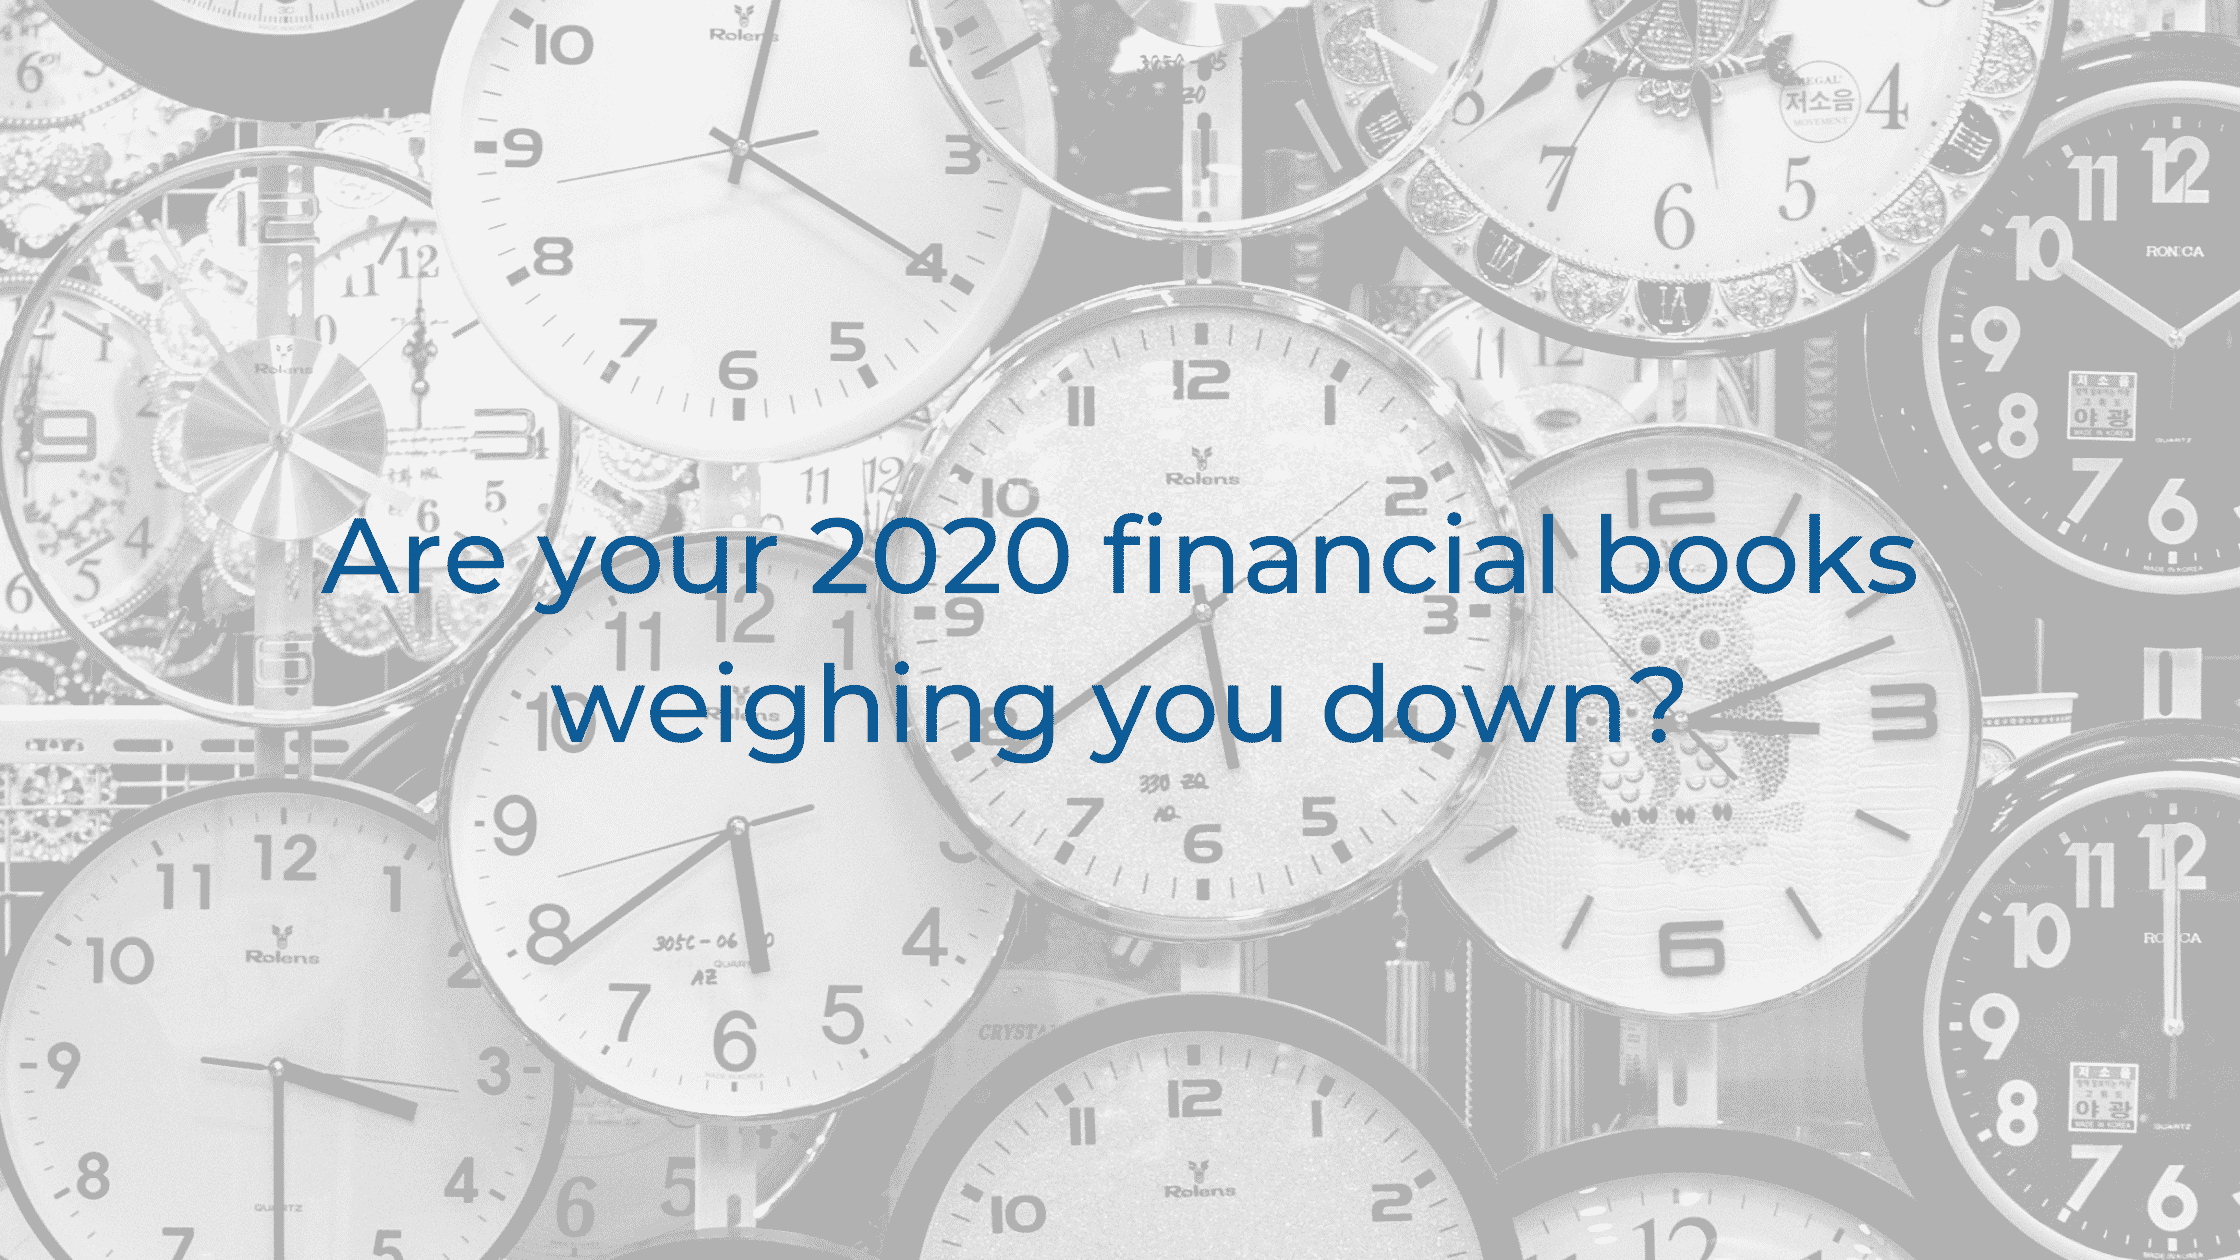 clocks - Are your 2020 financial books weighing you down?